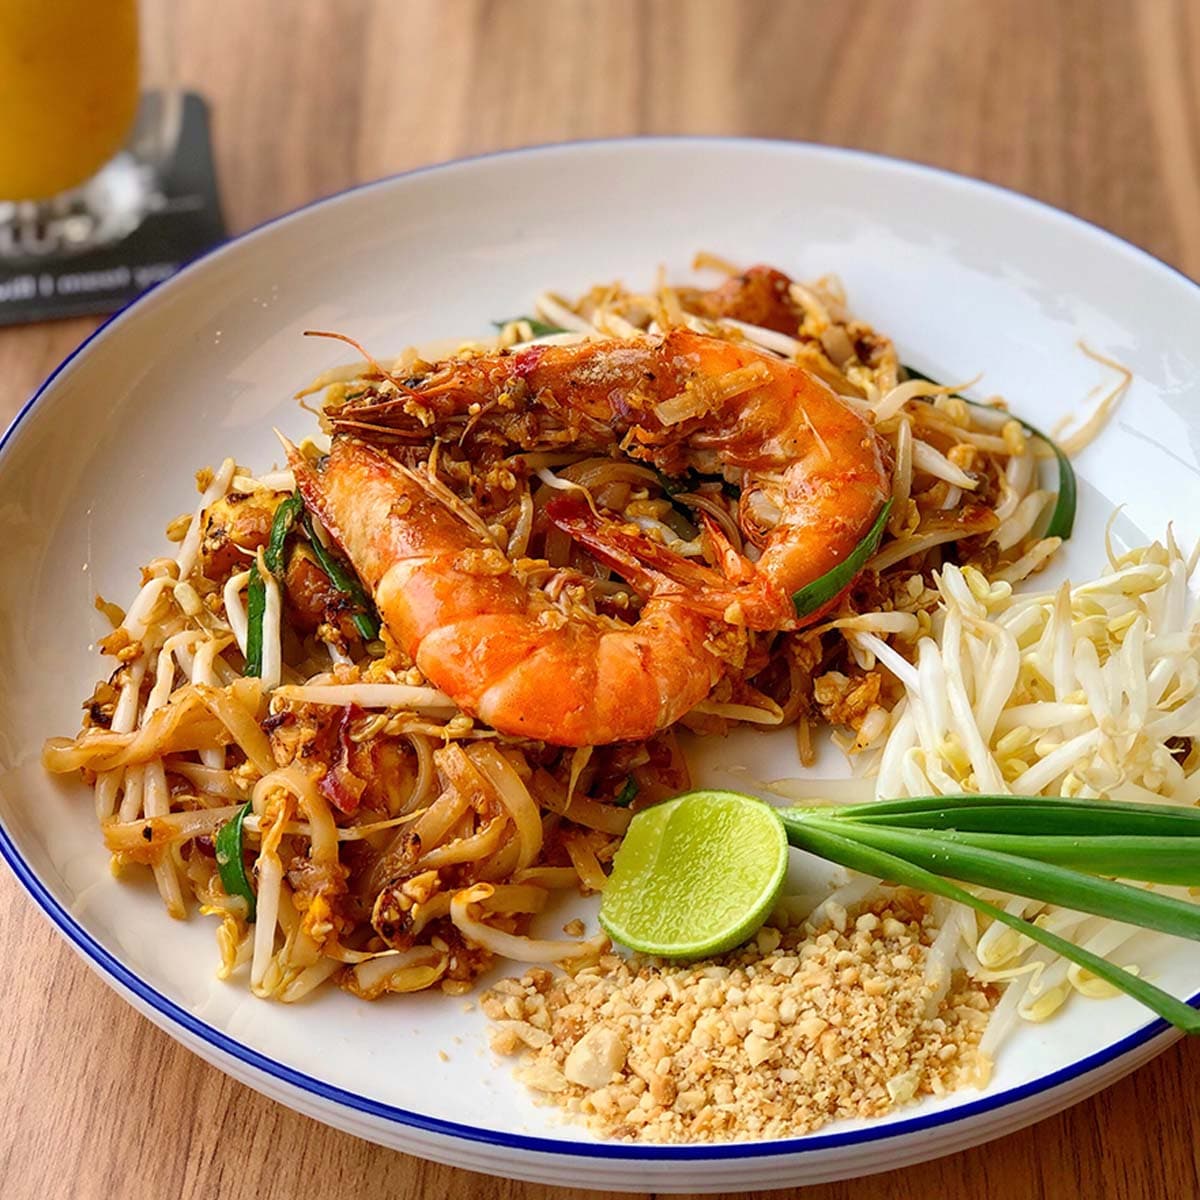 Pad Thai is probably the most well-known dish out of Thailand, Pad See Ew is somewhat underrated but is nonetheless deliciously savory and full of flavor.